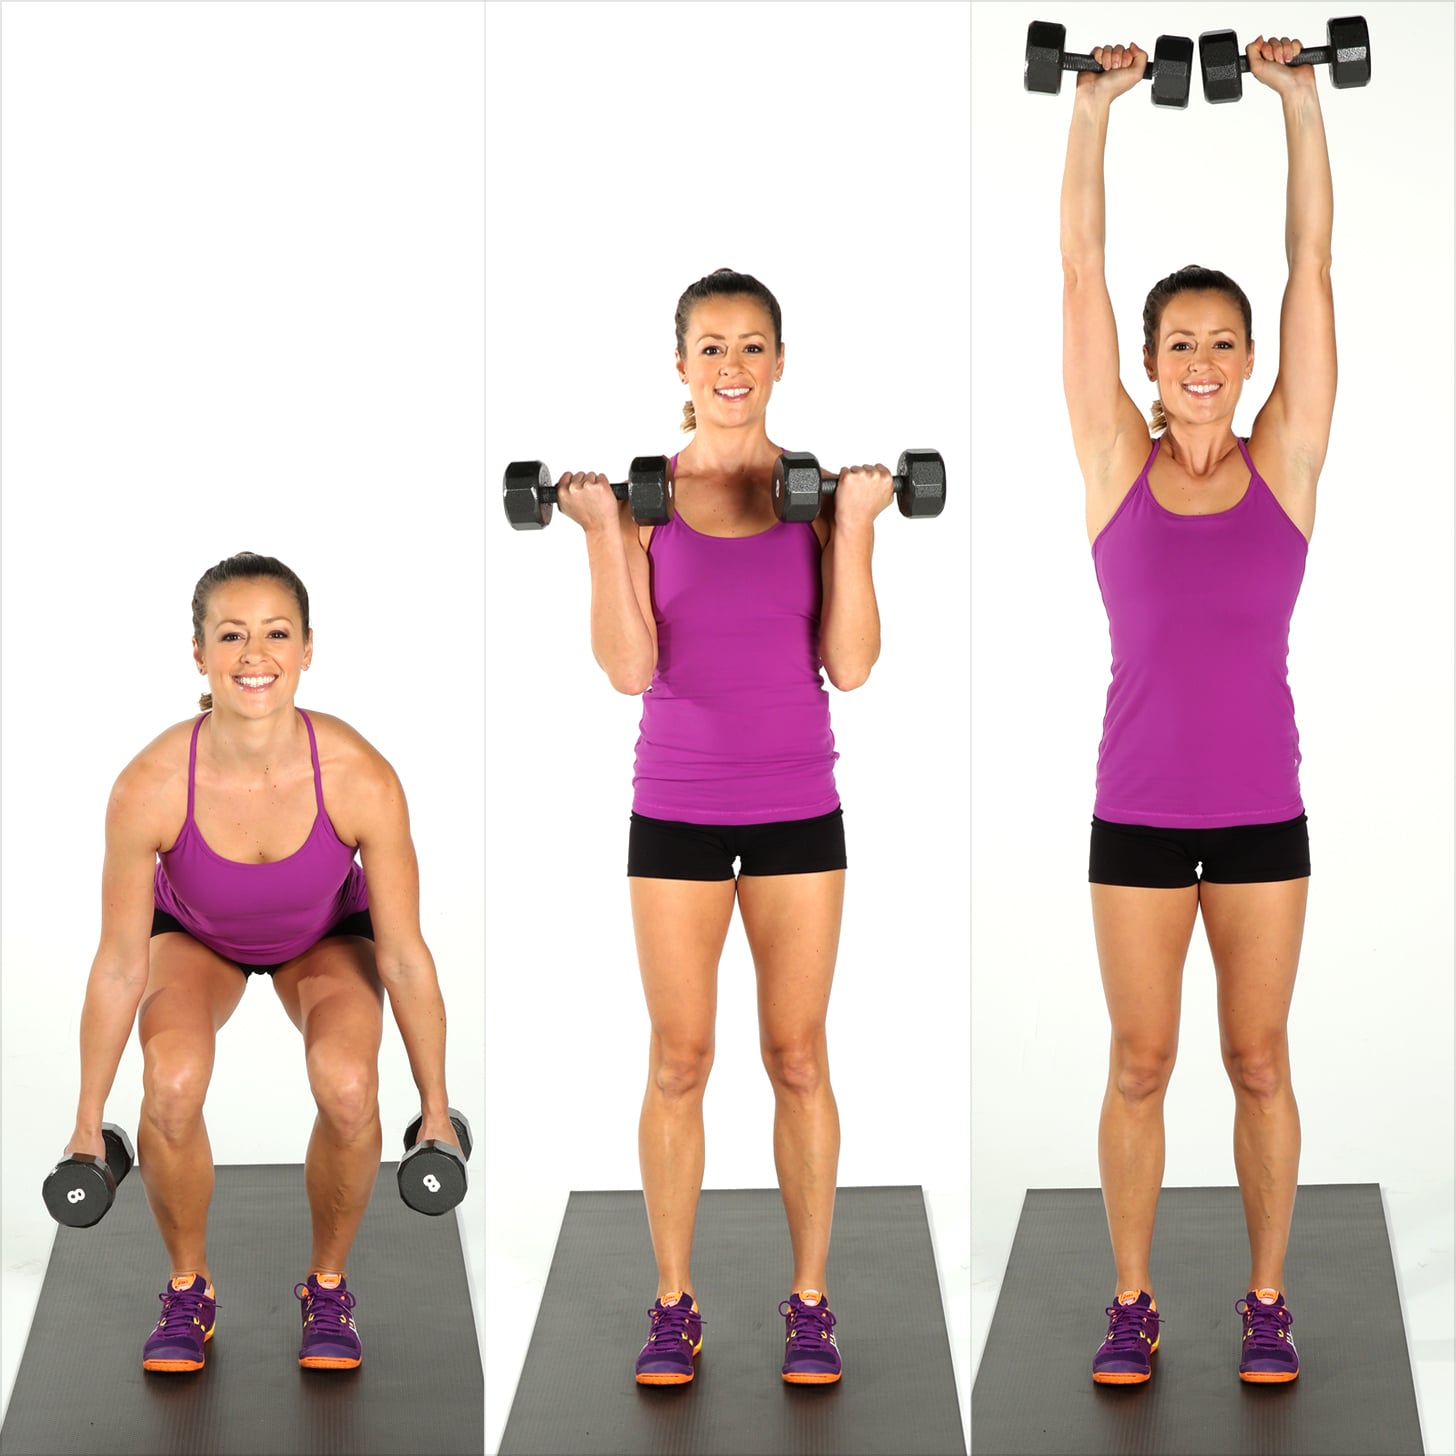 Dumbbell squat to dumbbell curl exercise instructions and video